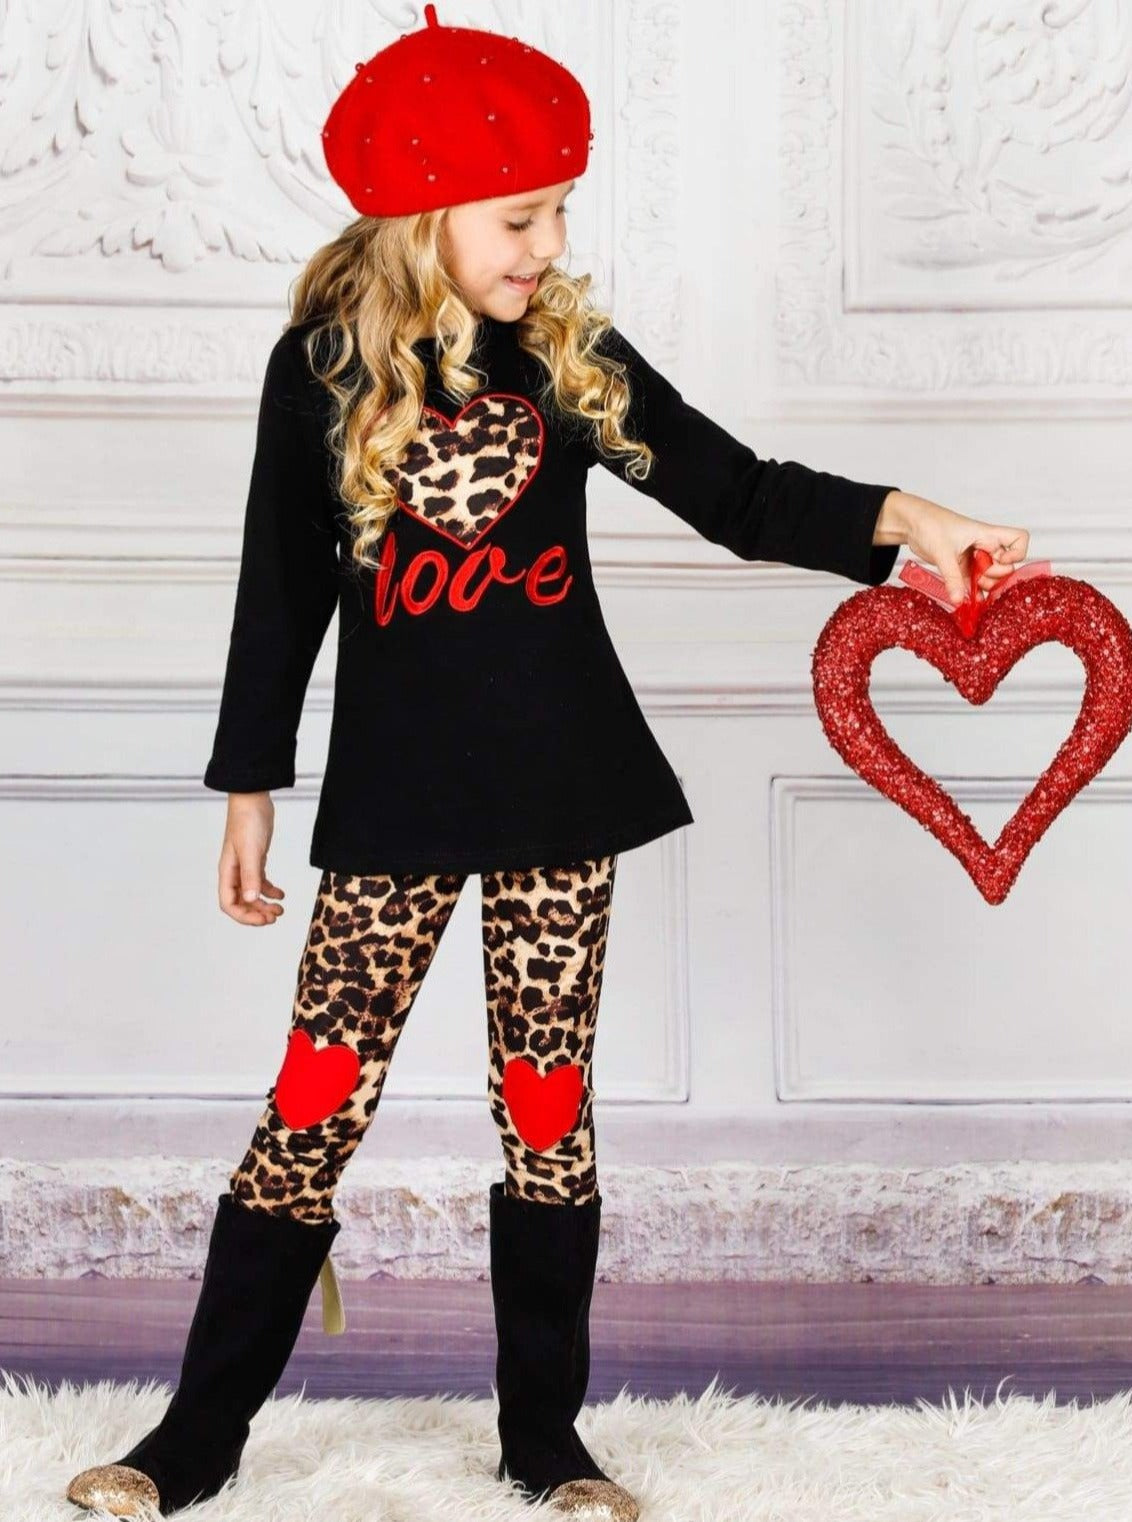 https://cdn.shopify.com/s/files/1/0996/1812/products/girls-heart-themed-love-long-sleeve-top-animal-print-patch-leggings-set-black-2t-20-39-99-40-59-2t3t-4t5y-6x6y-fall-casual-mia-belle-baby_540.jpg